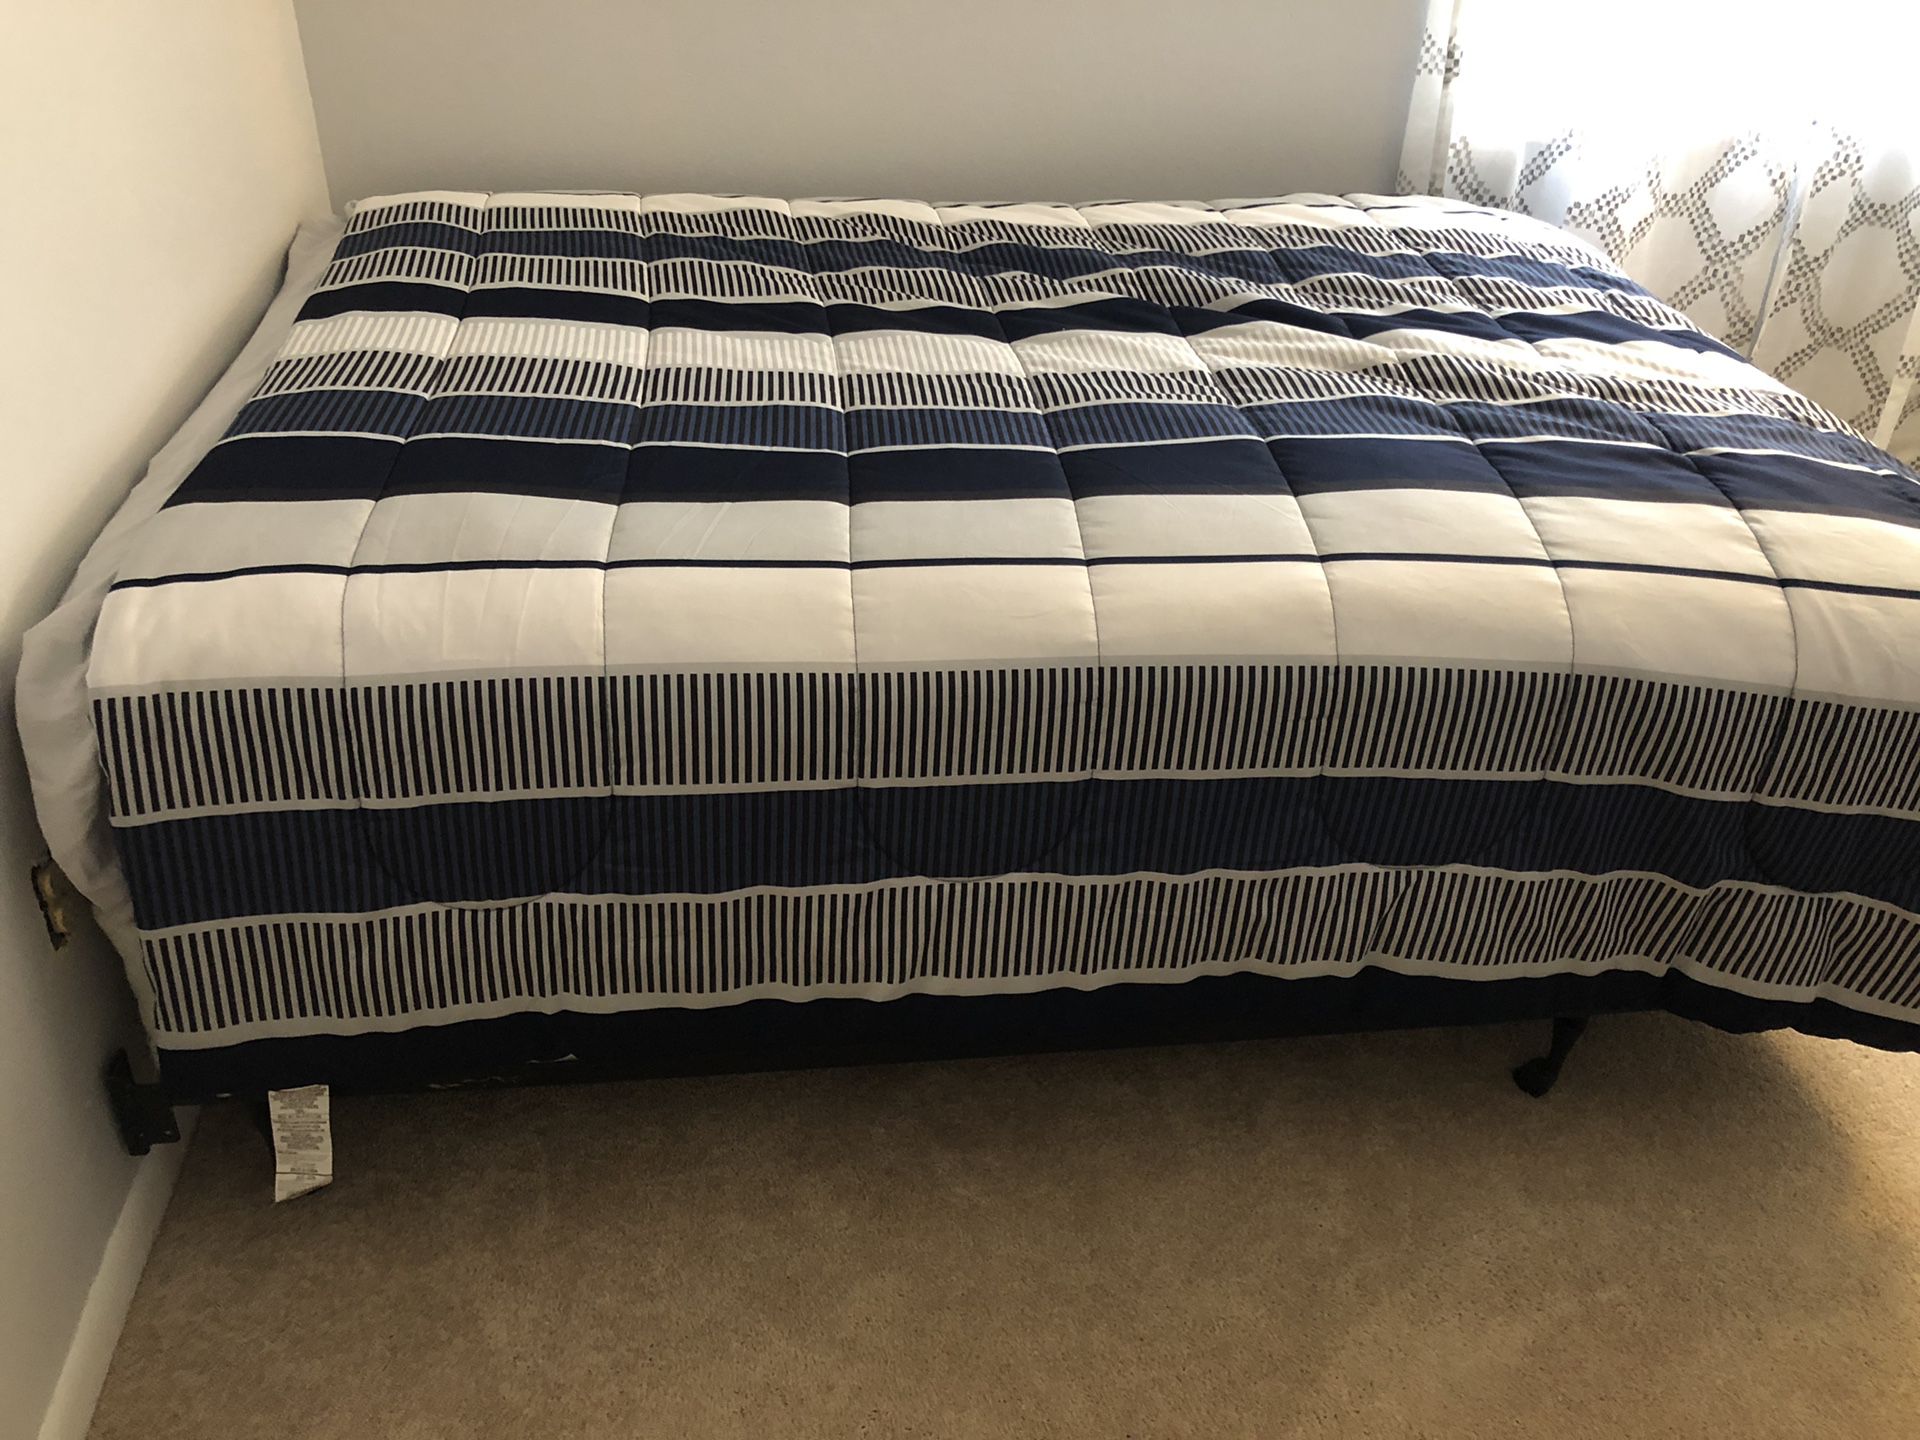 Full size bed frame and box springs for sale